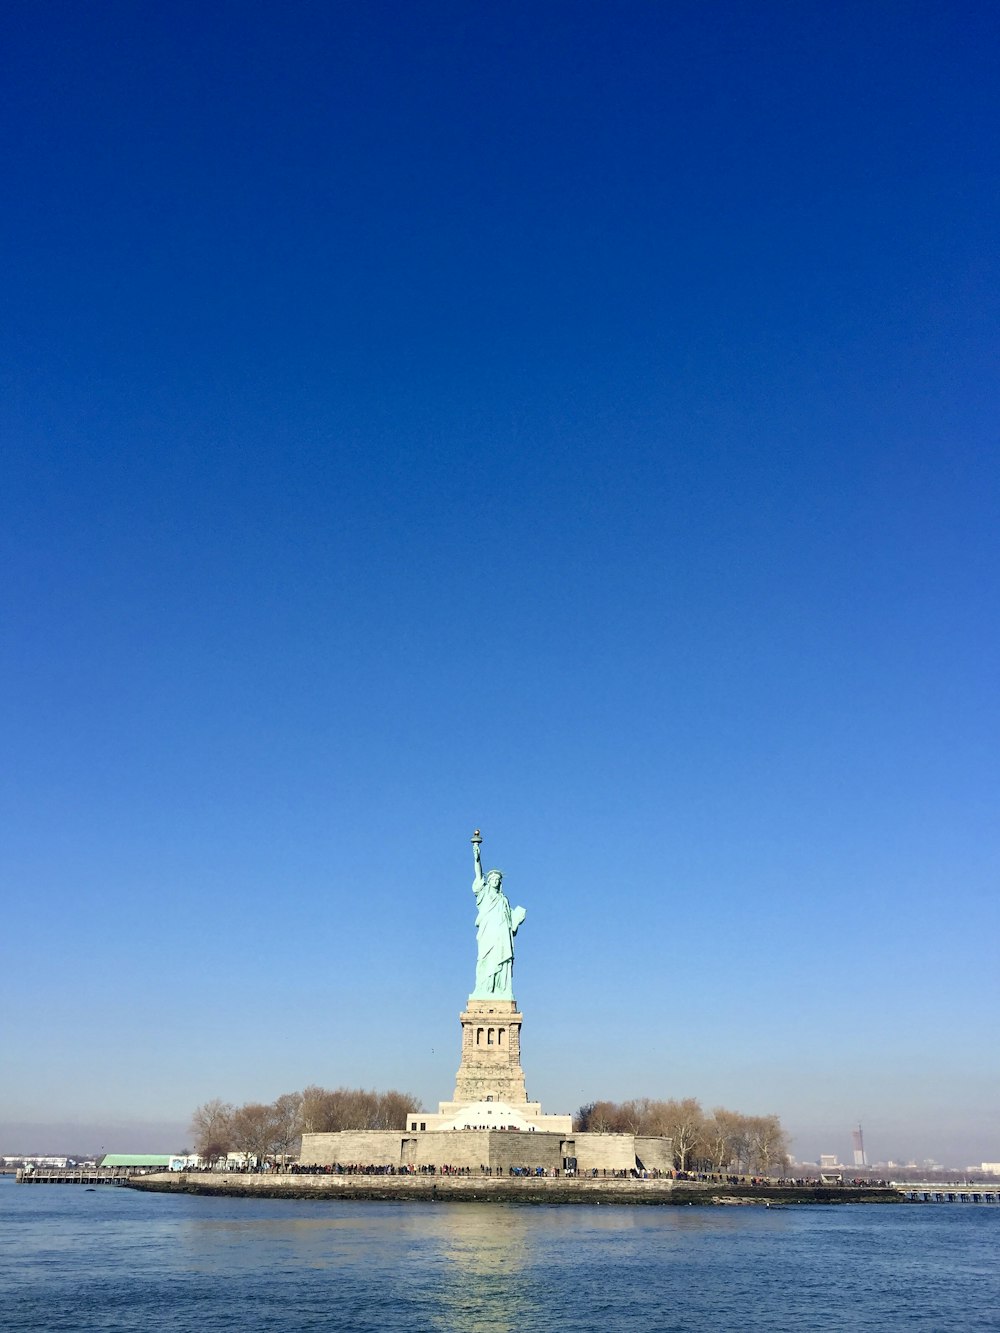 the statue of liberty is in the middle of the water